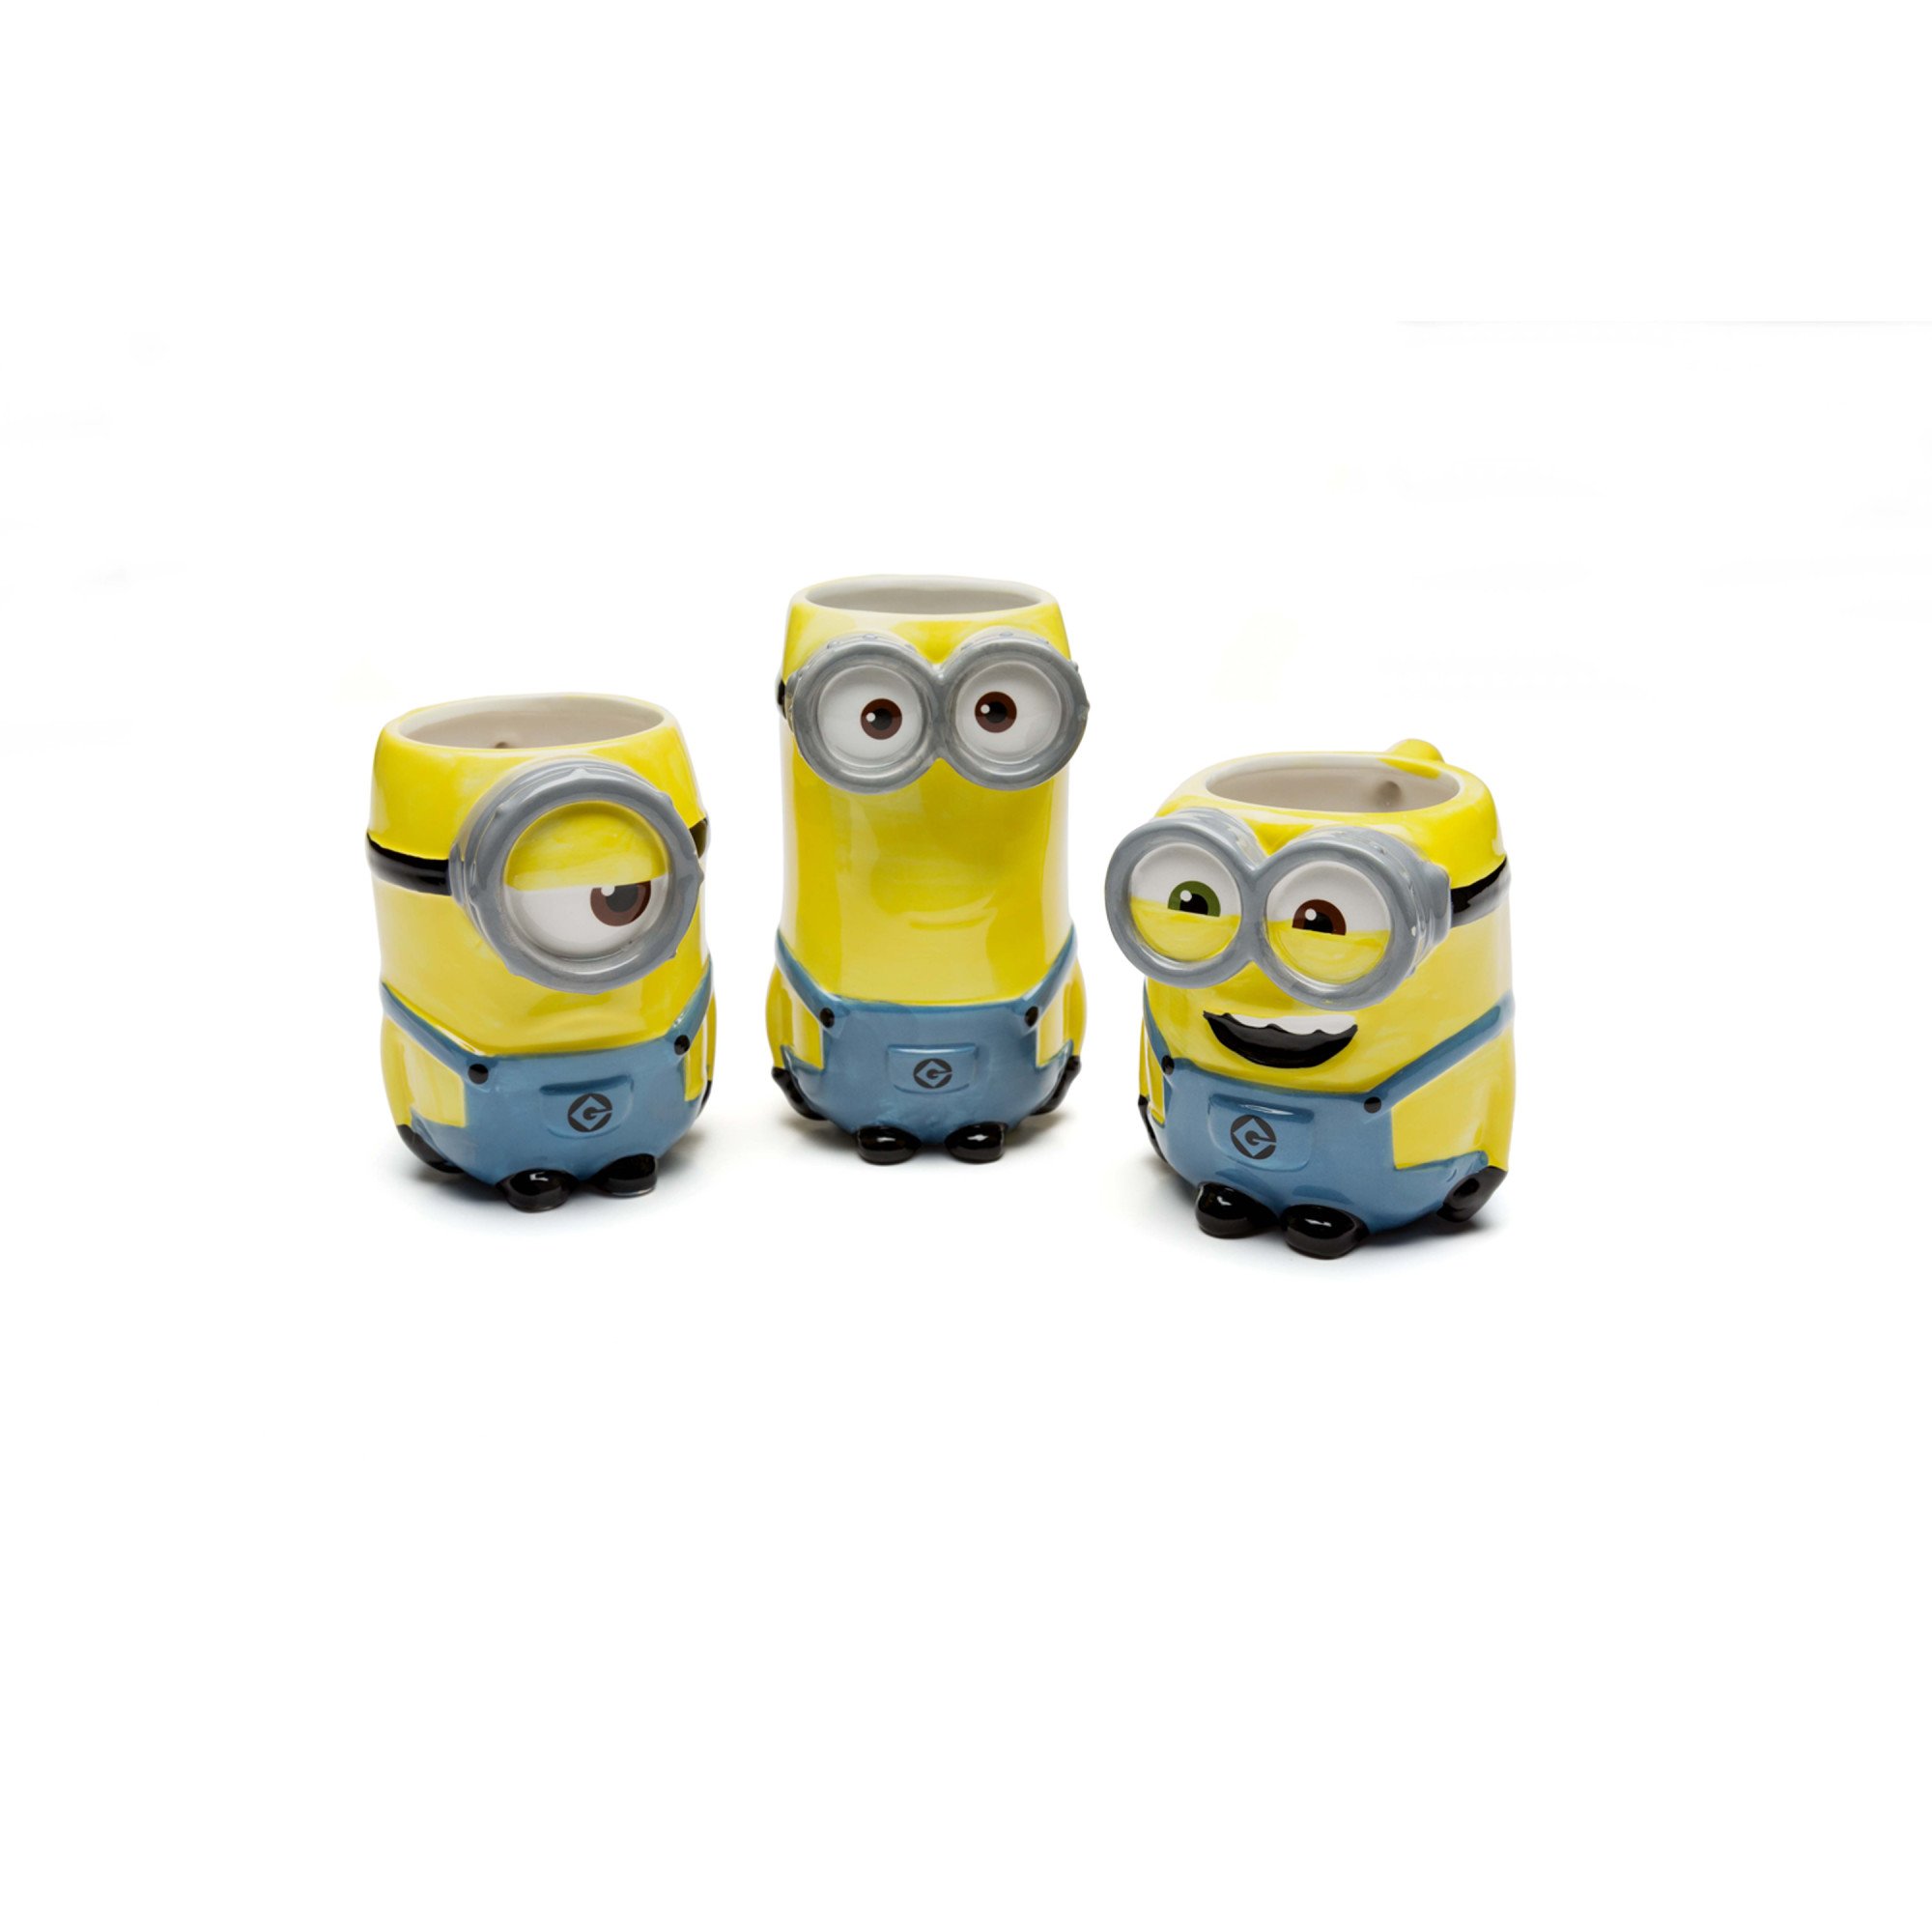 Zak Designs Despicable Me Kevin Minion 3D Sculpted Ceramic Coffee Mug for Hot Drinks, 14 oz